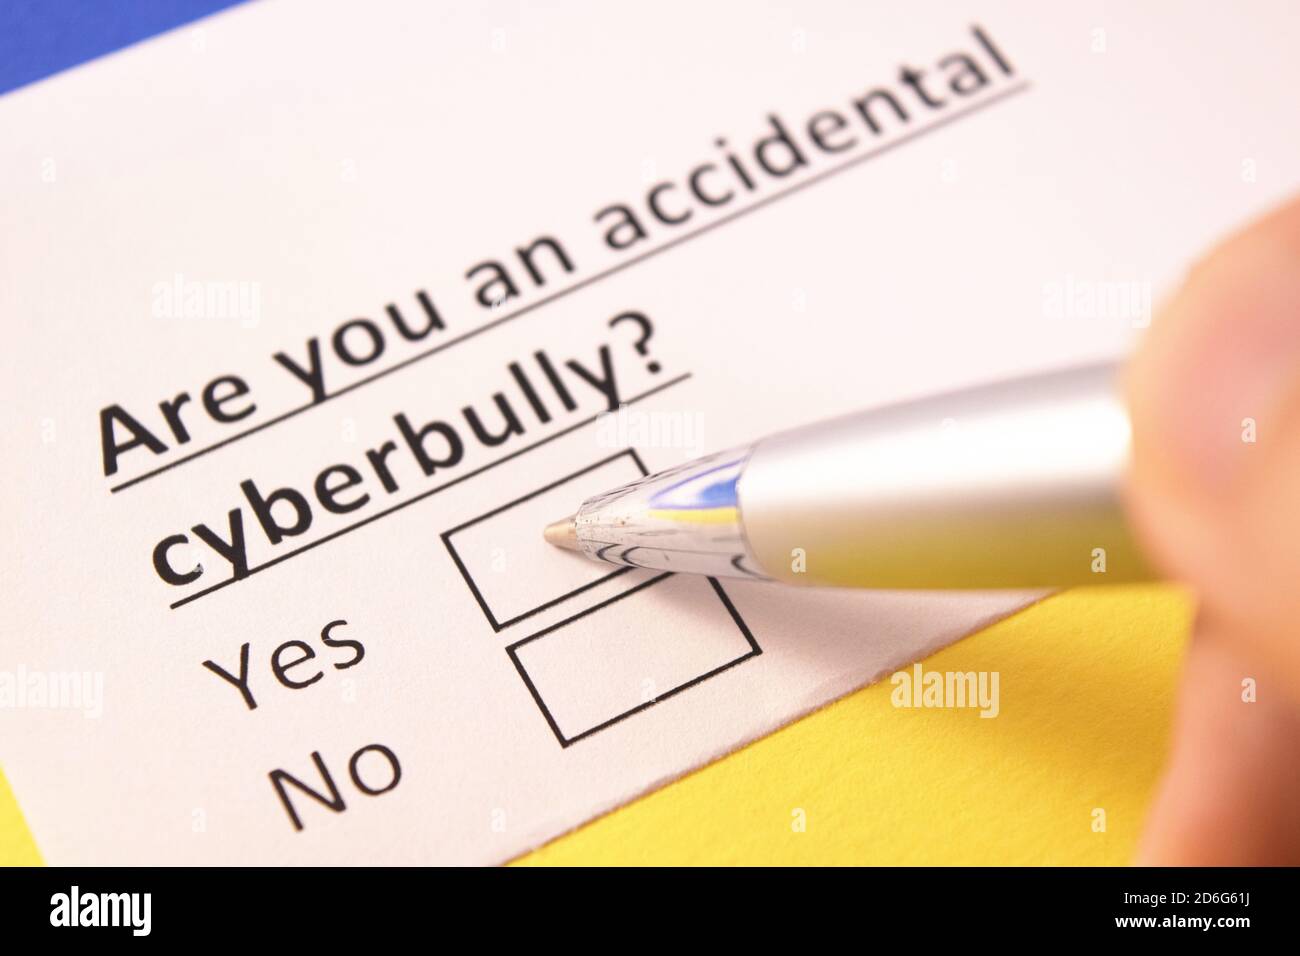 Are you an accidental cyberbully? Yes or no? Stock Photo